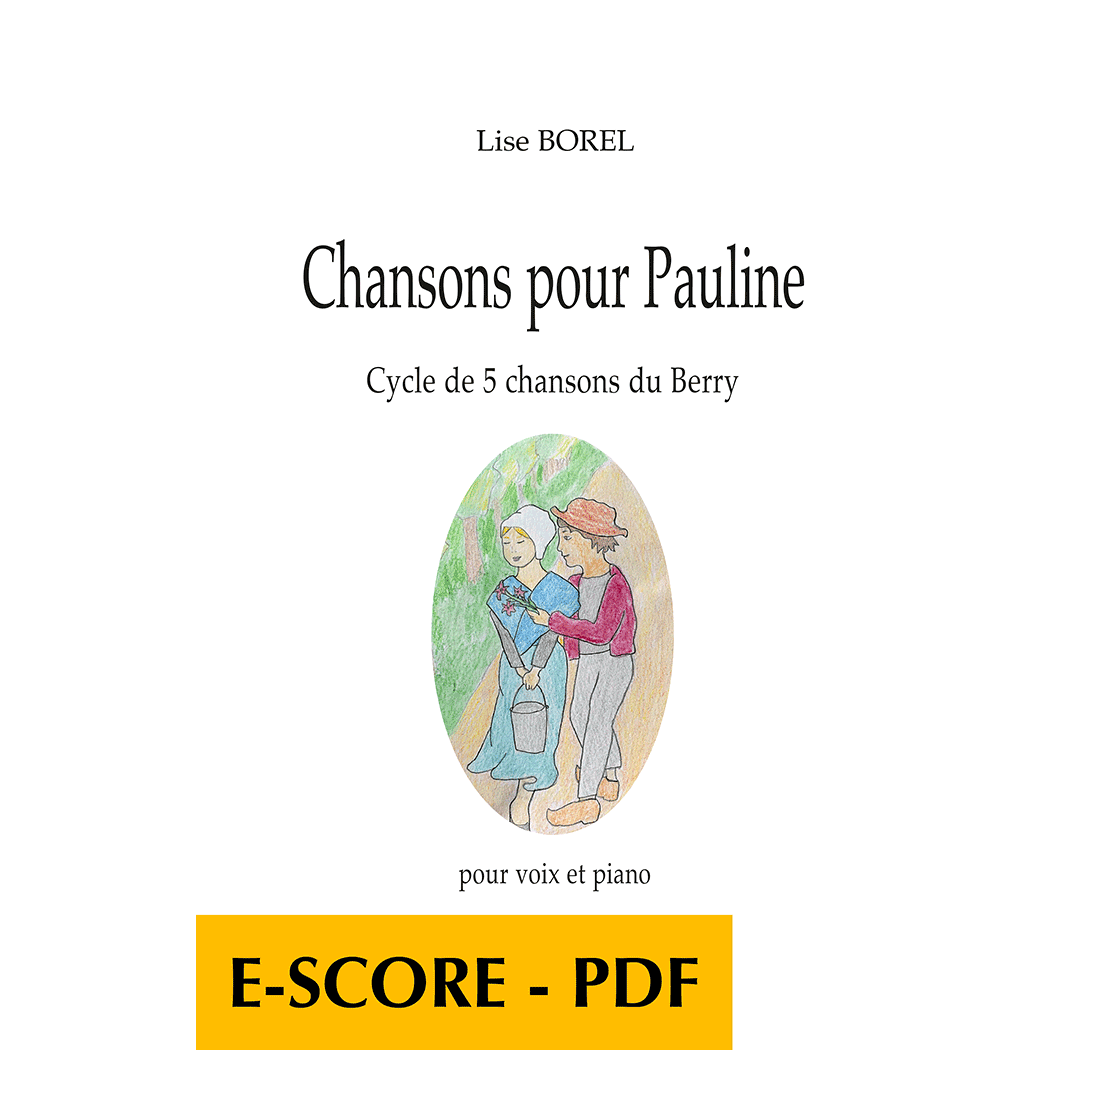 Chansons pour Pauline - 5 traditional Songs from the Berry for voice and piano - E-score PDF